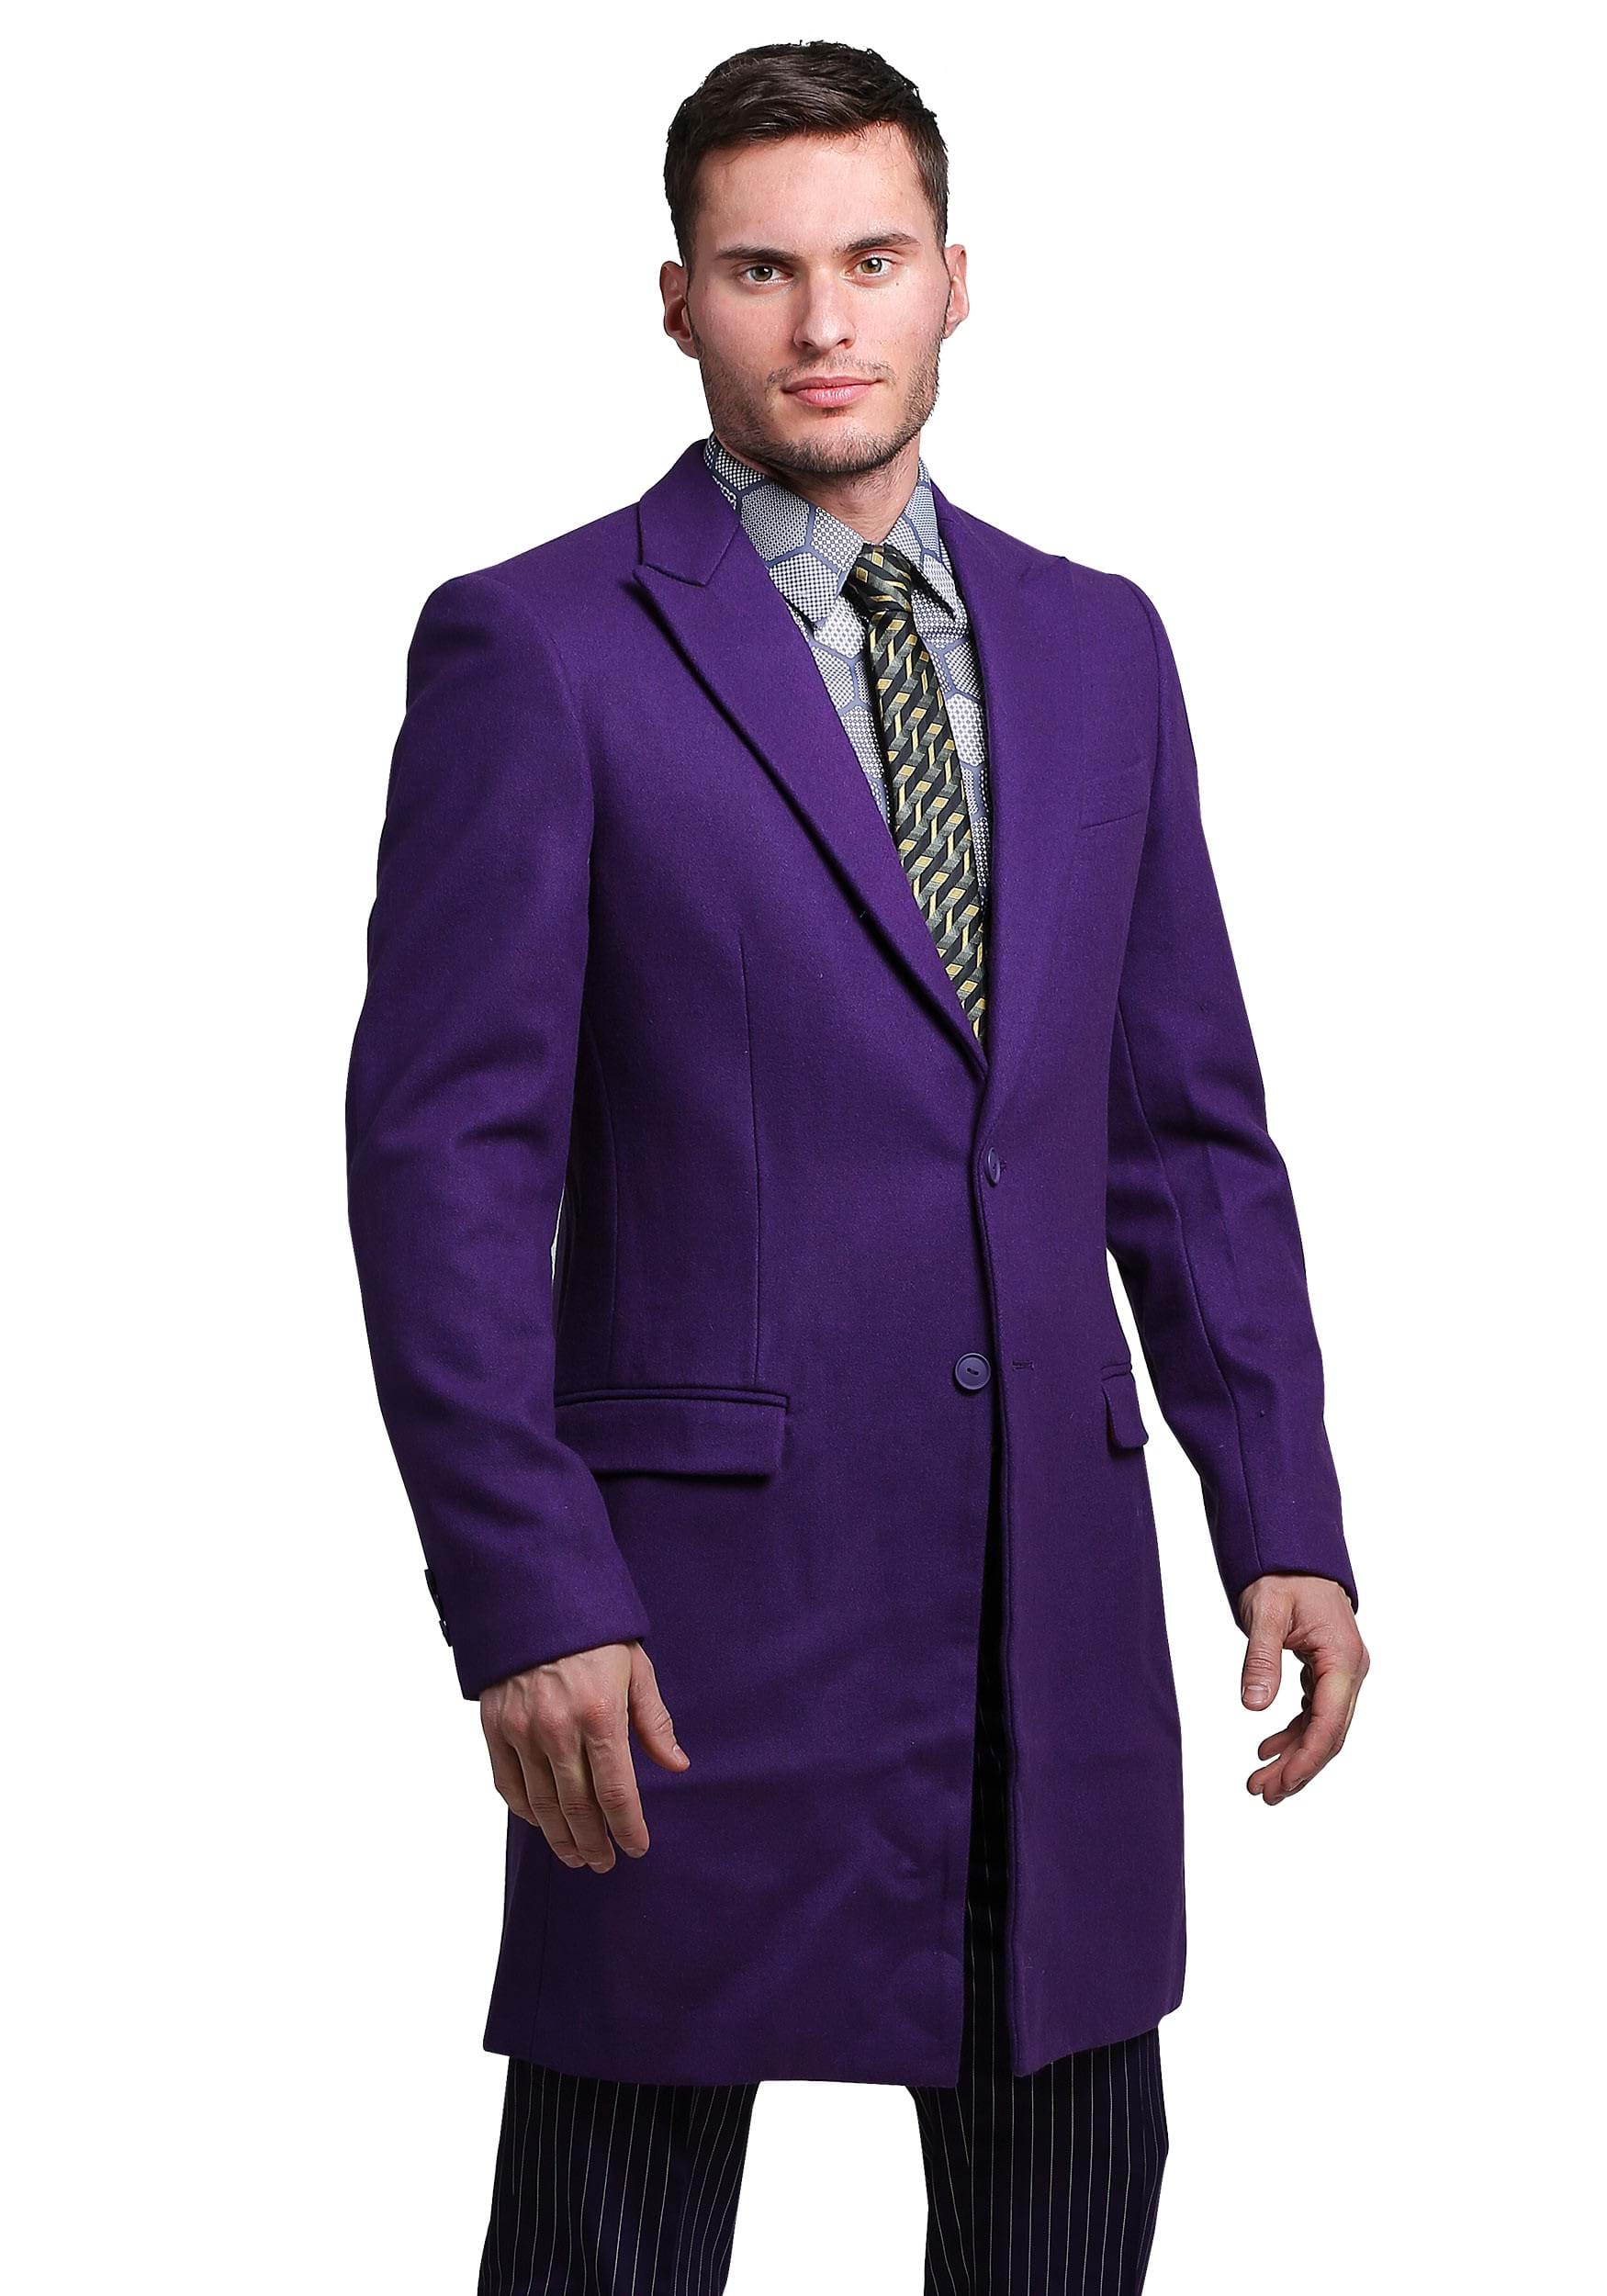 Image of THE JOKER Slim Fit Suit Overcoat (Authentic) ID FUN9011O-34